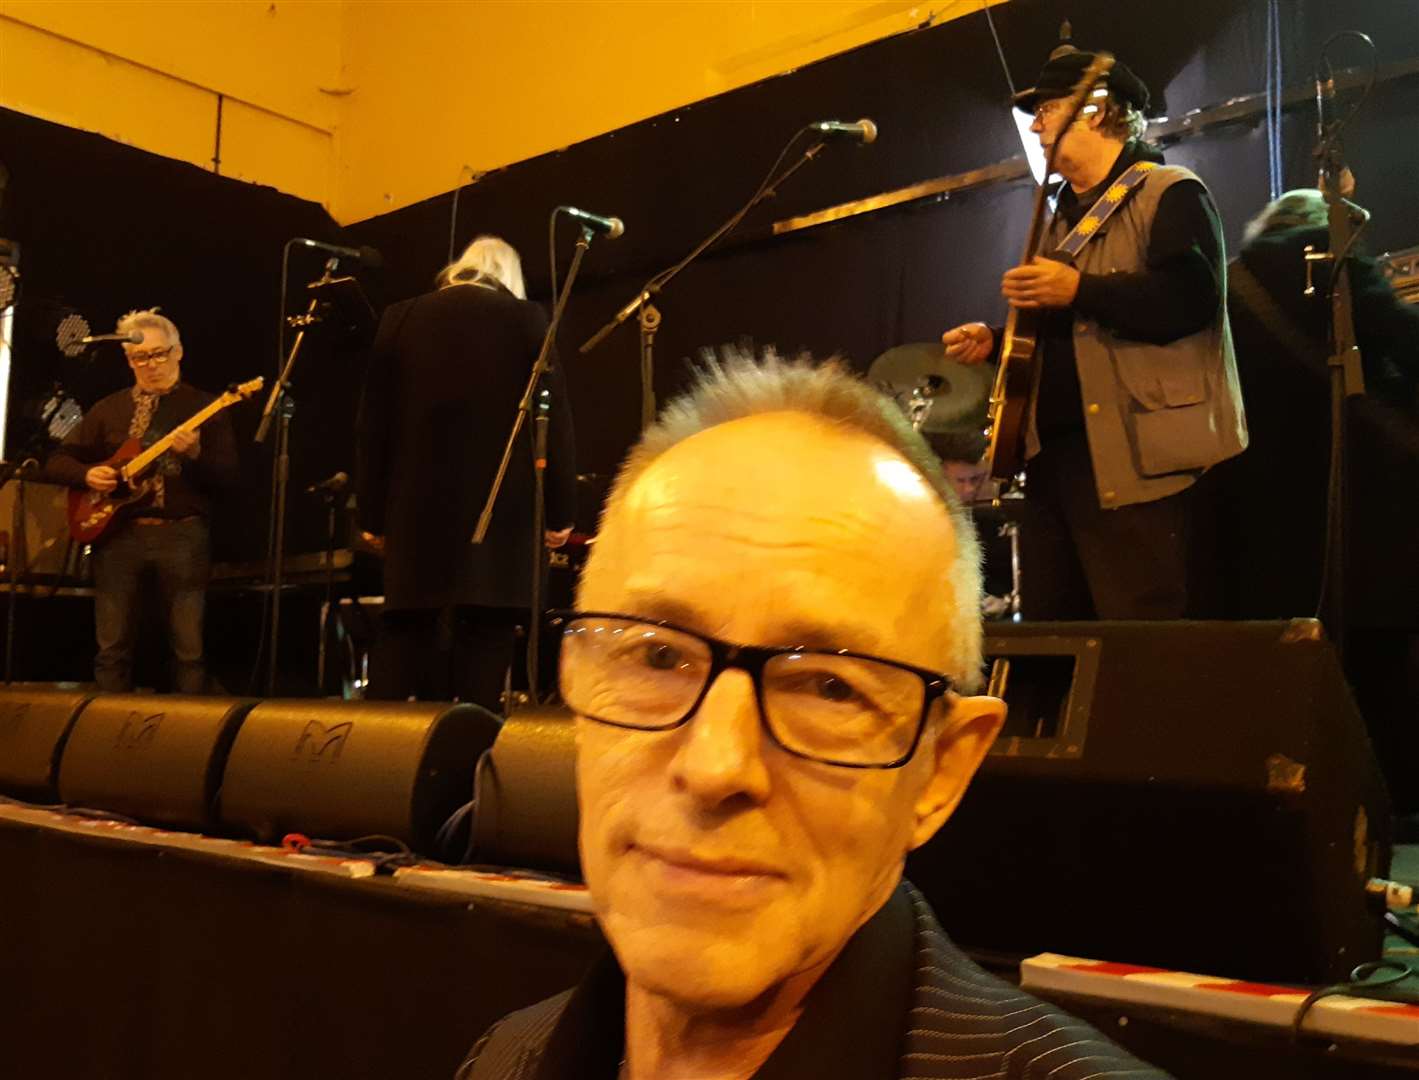 Topper Headon with The Blockheads at The Booking Hall, November 2018